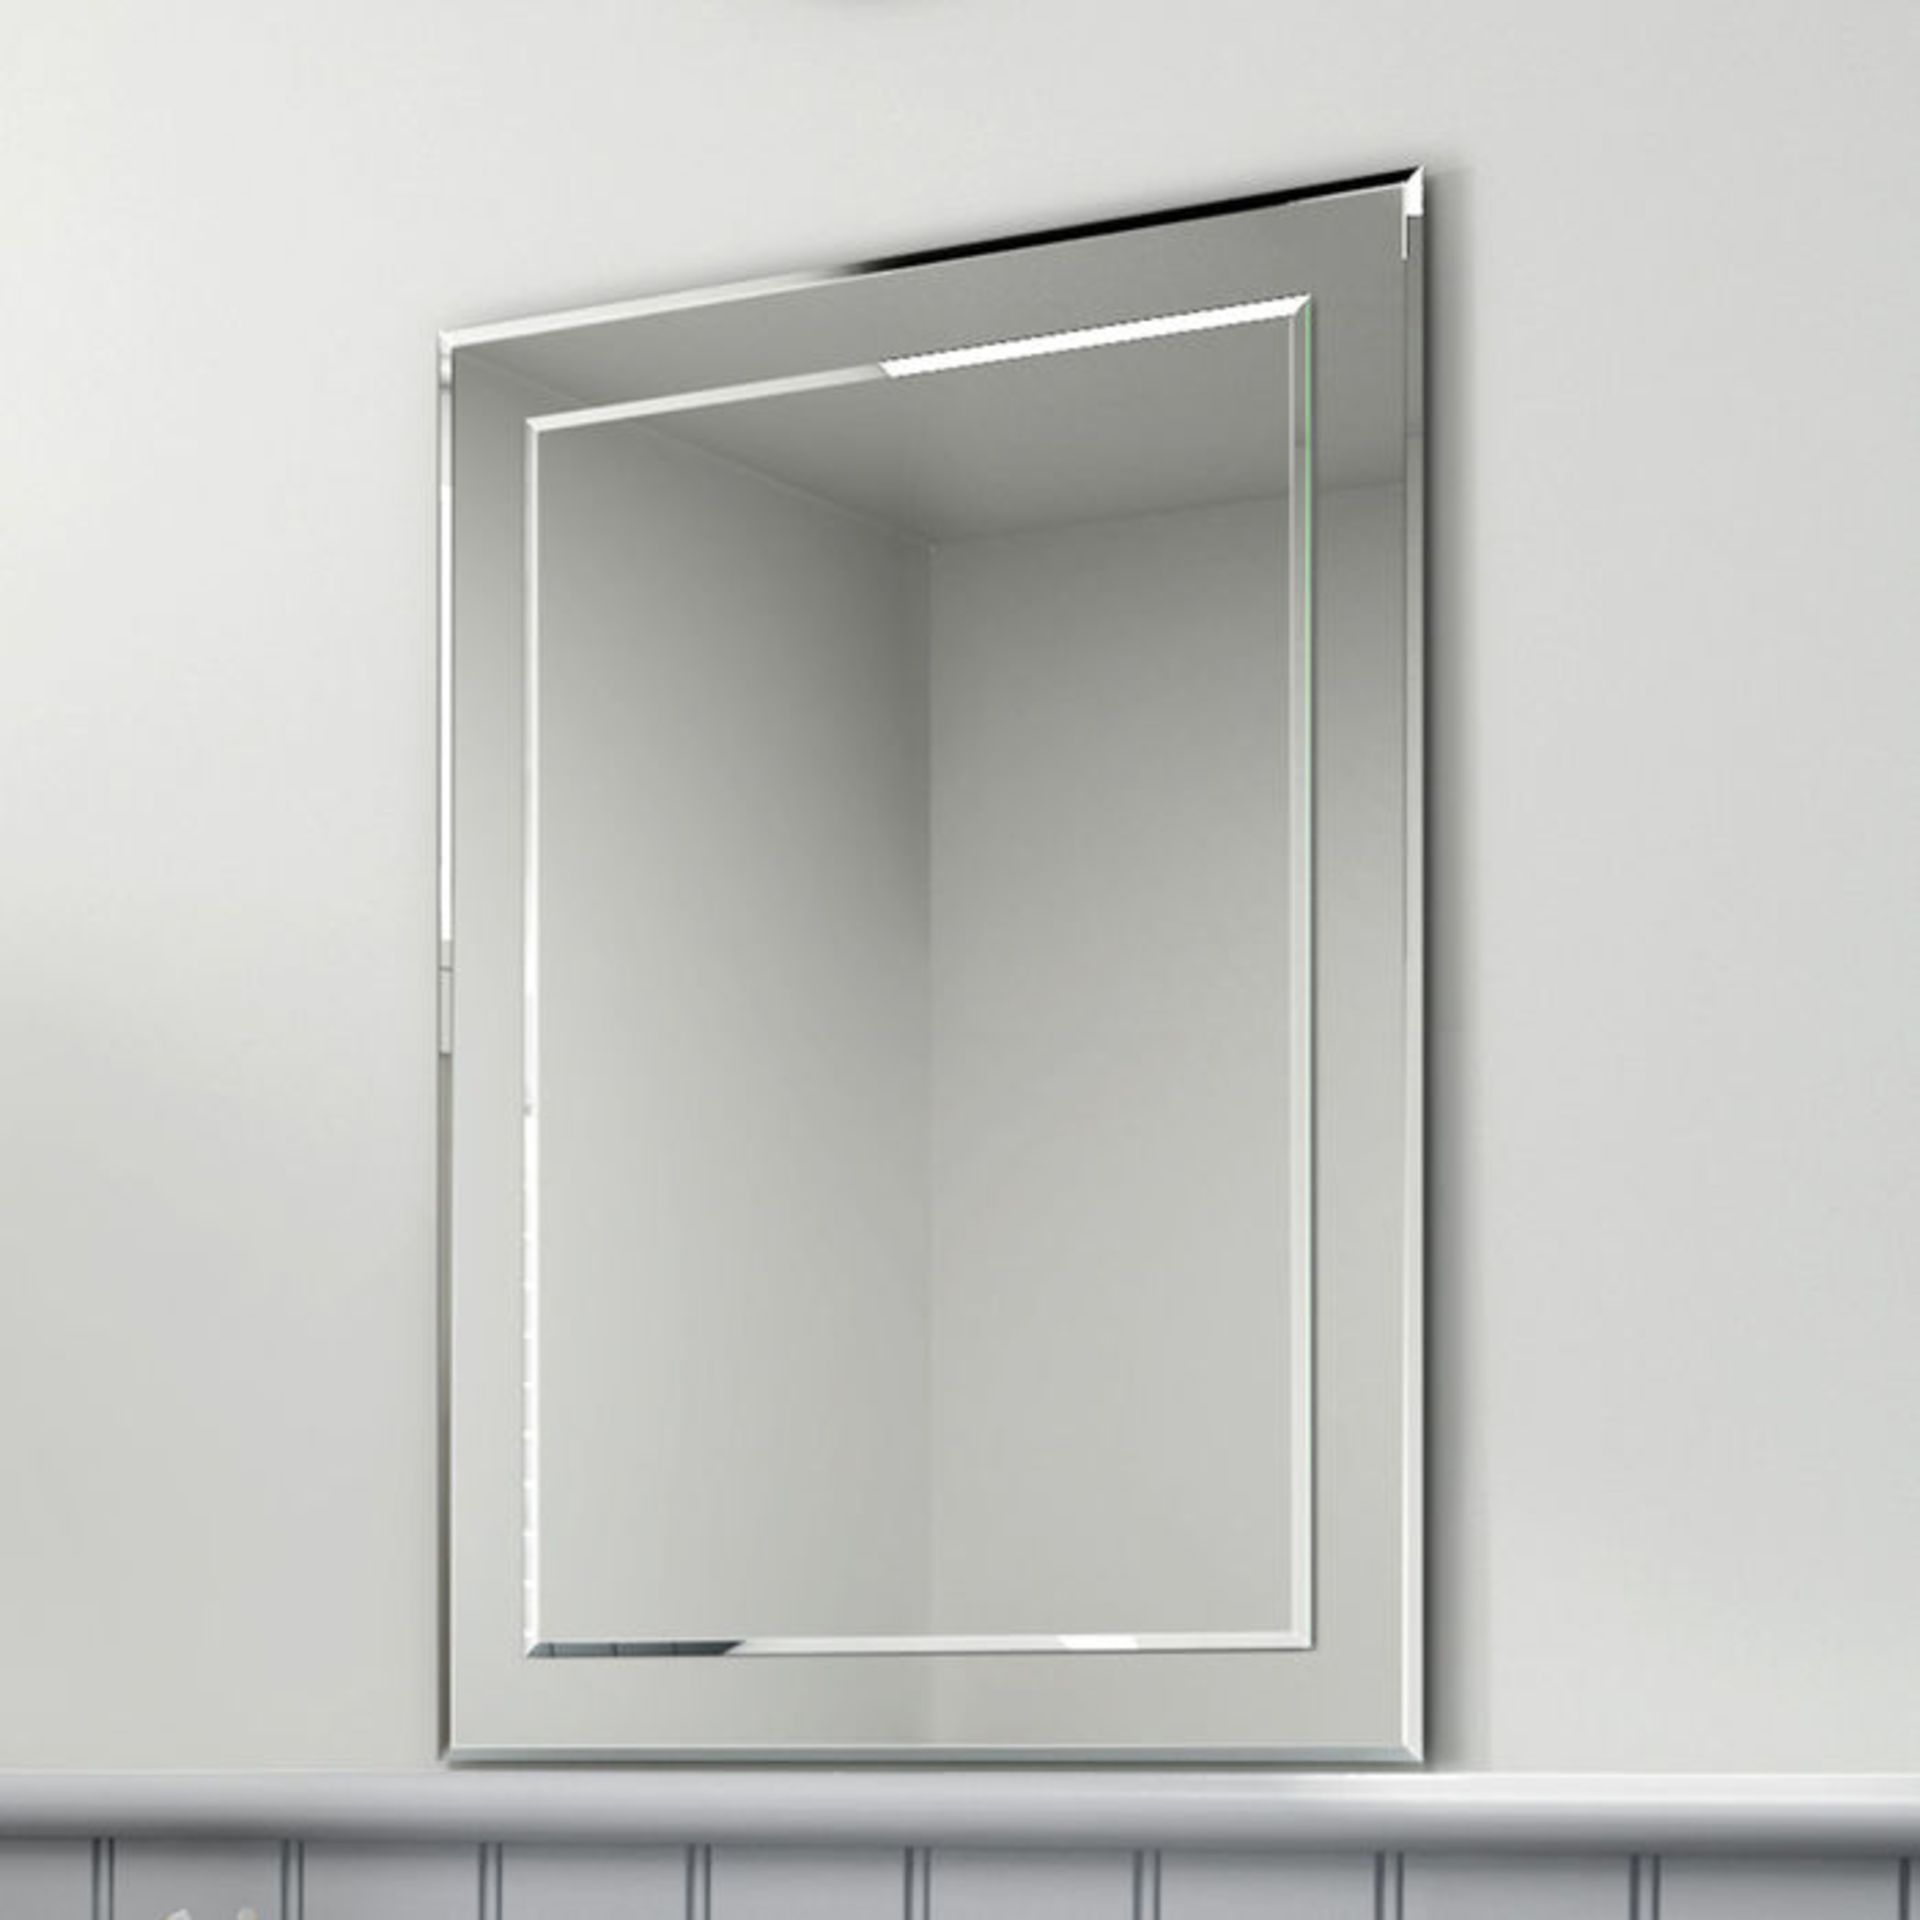 (PA23) 500x700mm Bevel Mirror. RRP £69.99. Smooth beveled edge for additional safety and style